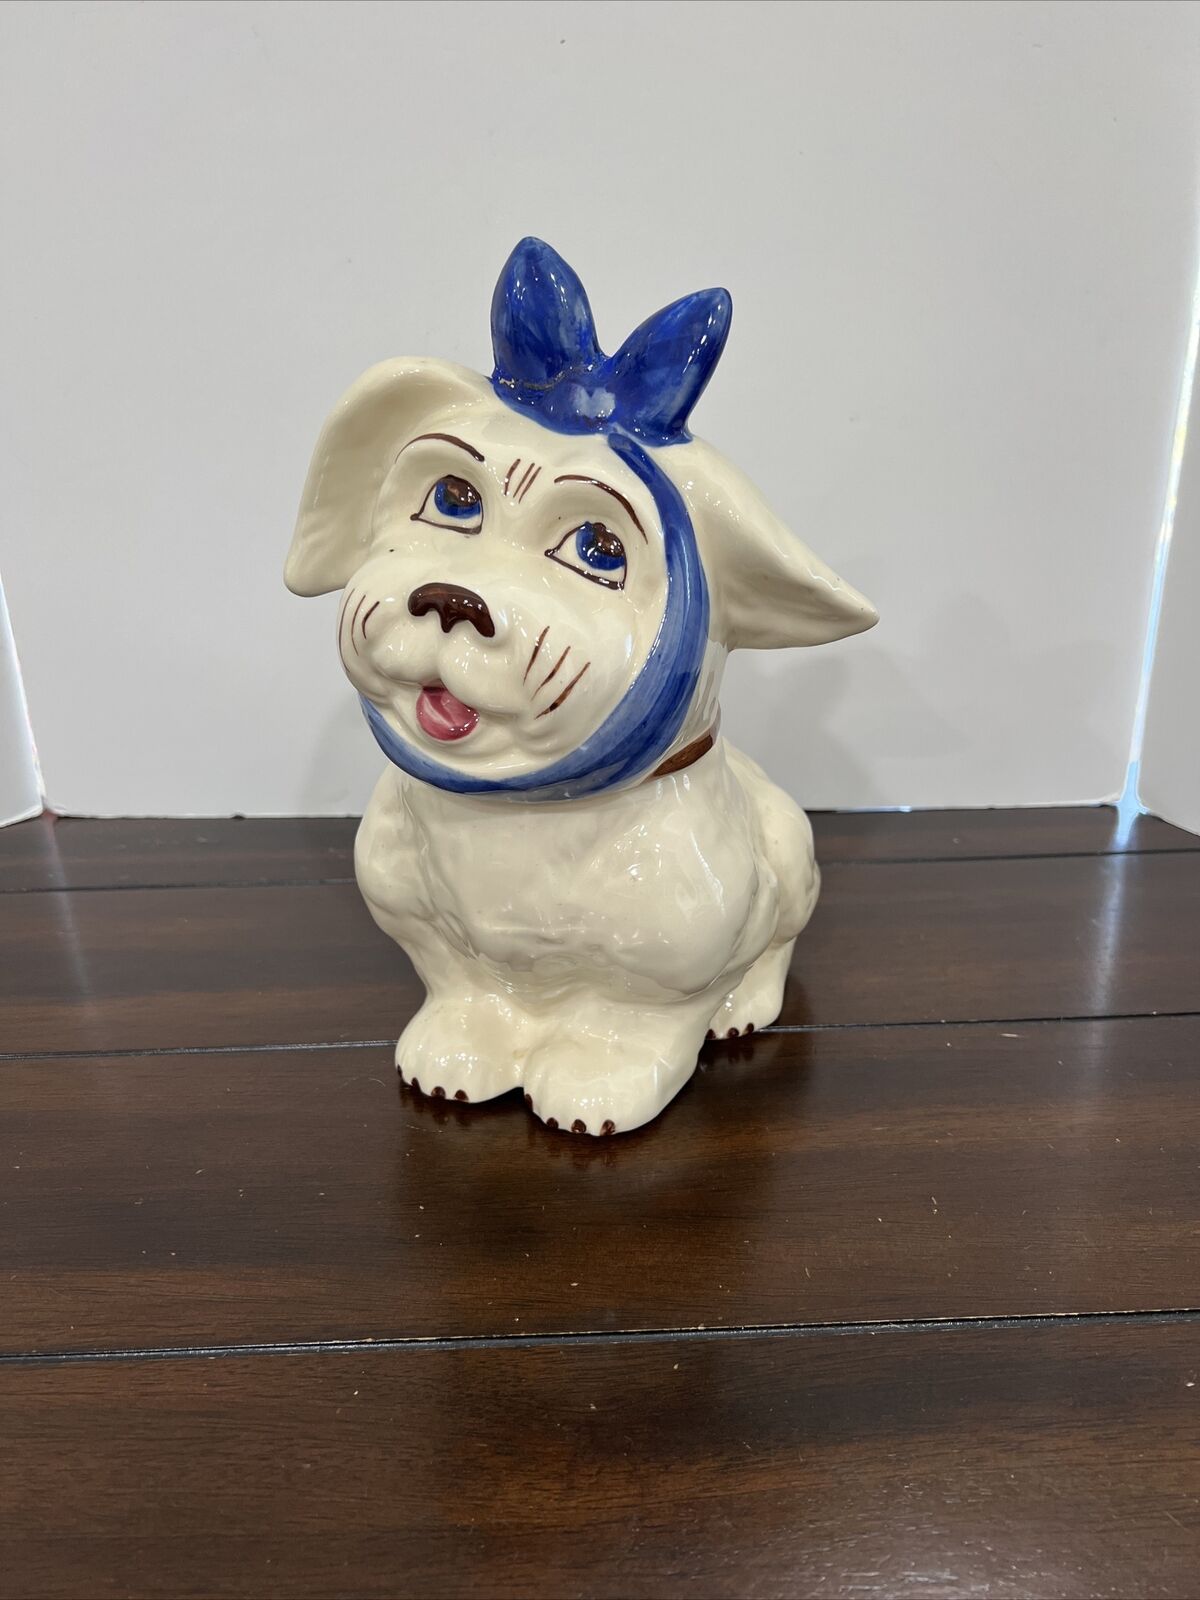 Vintage Shawnee Pottery Muggsy with Toothache Cookie Jar Blue Tie/Bow - SeeNote